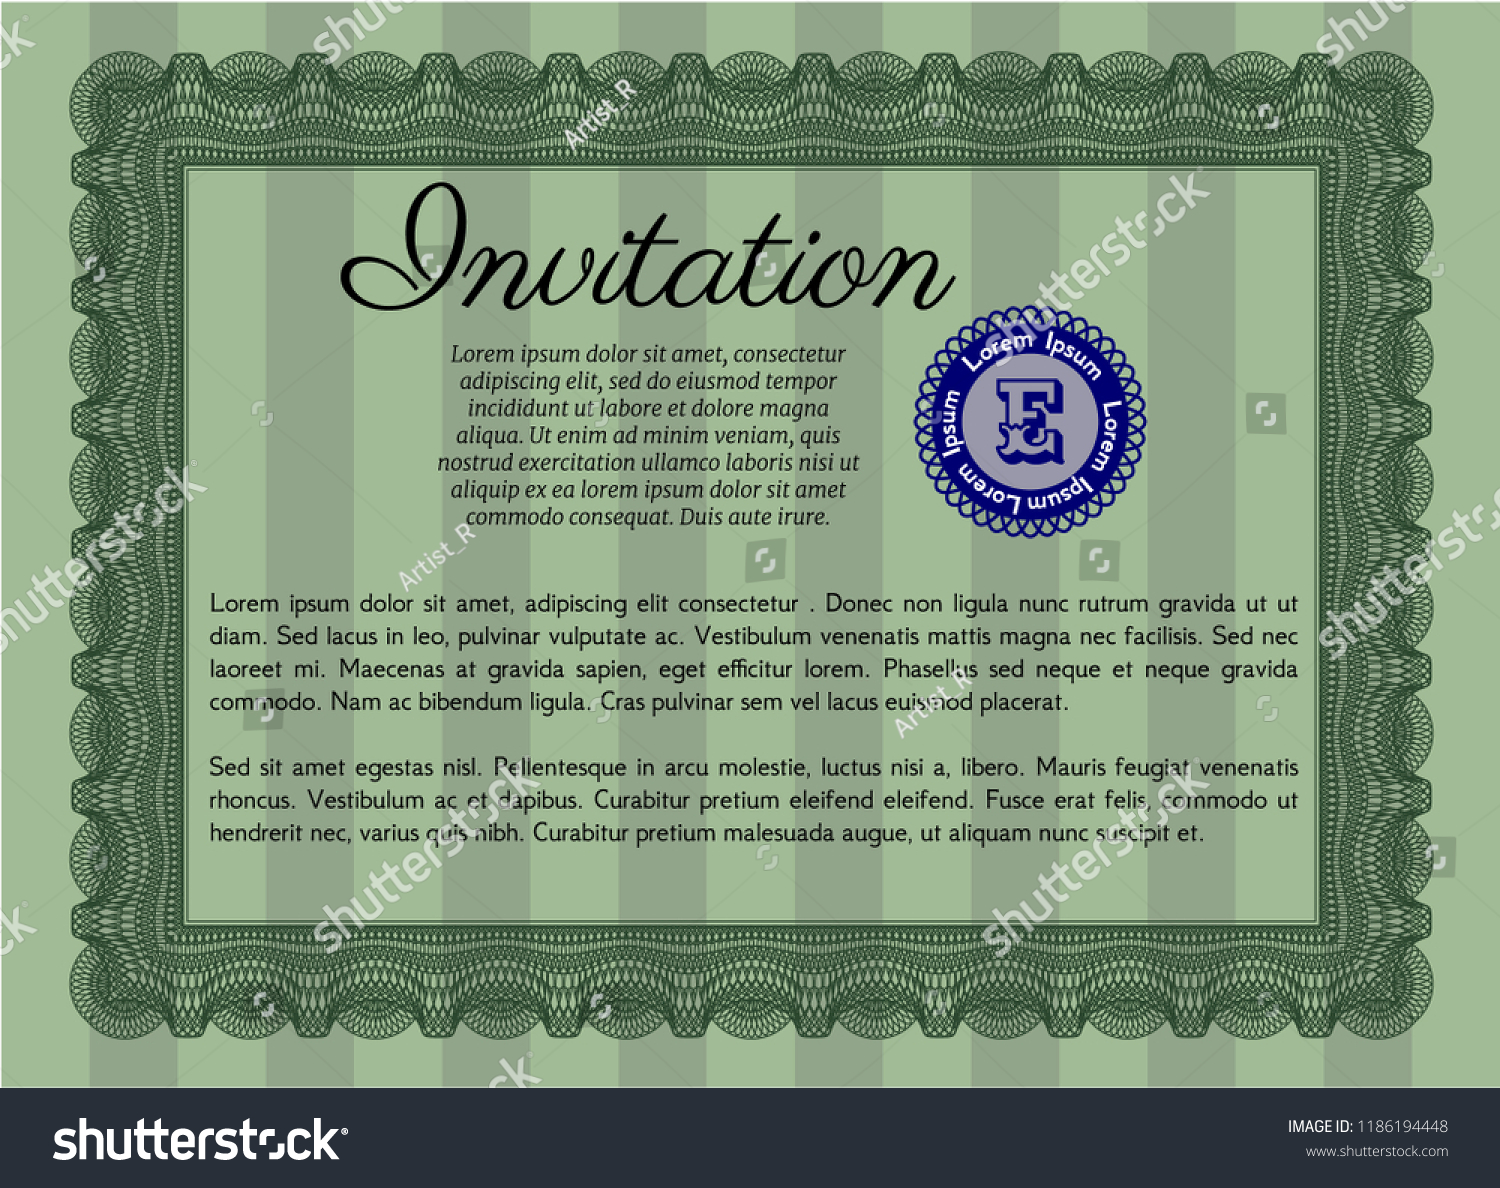 Green Formal invitation. Nice design. With complex background. Vector illustration.  #1186194448